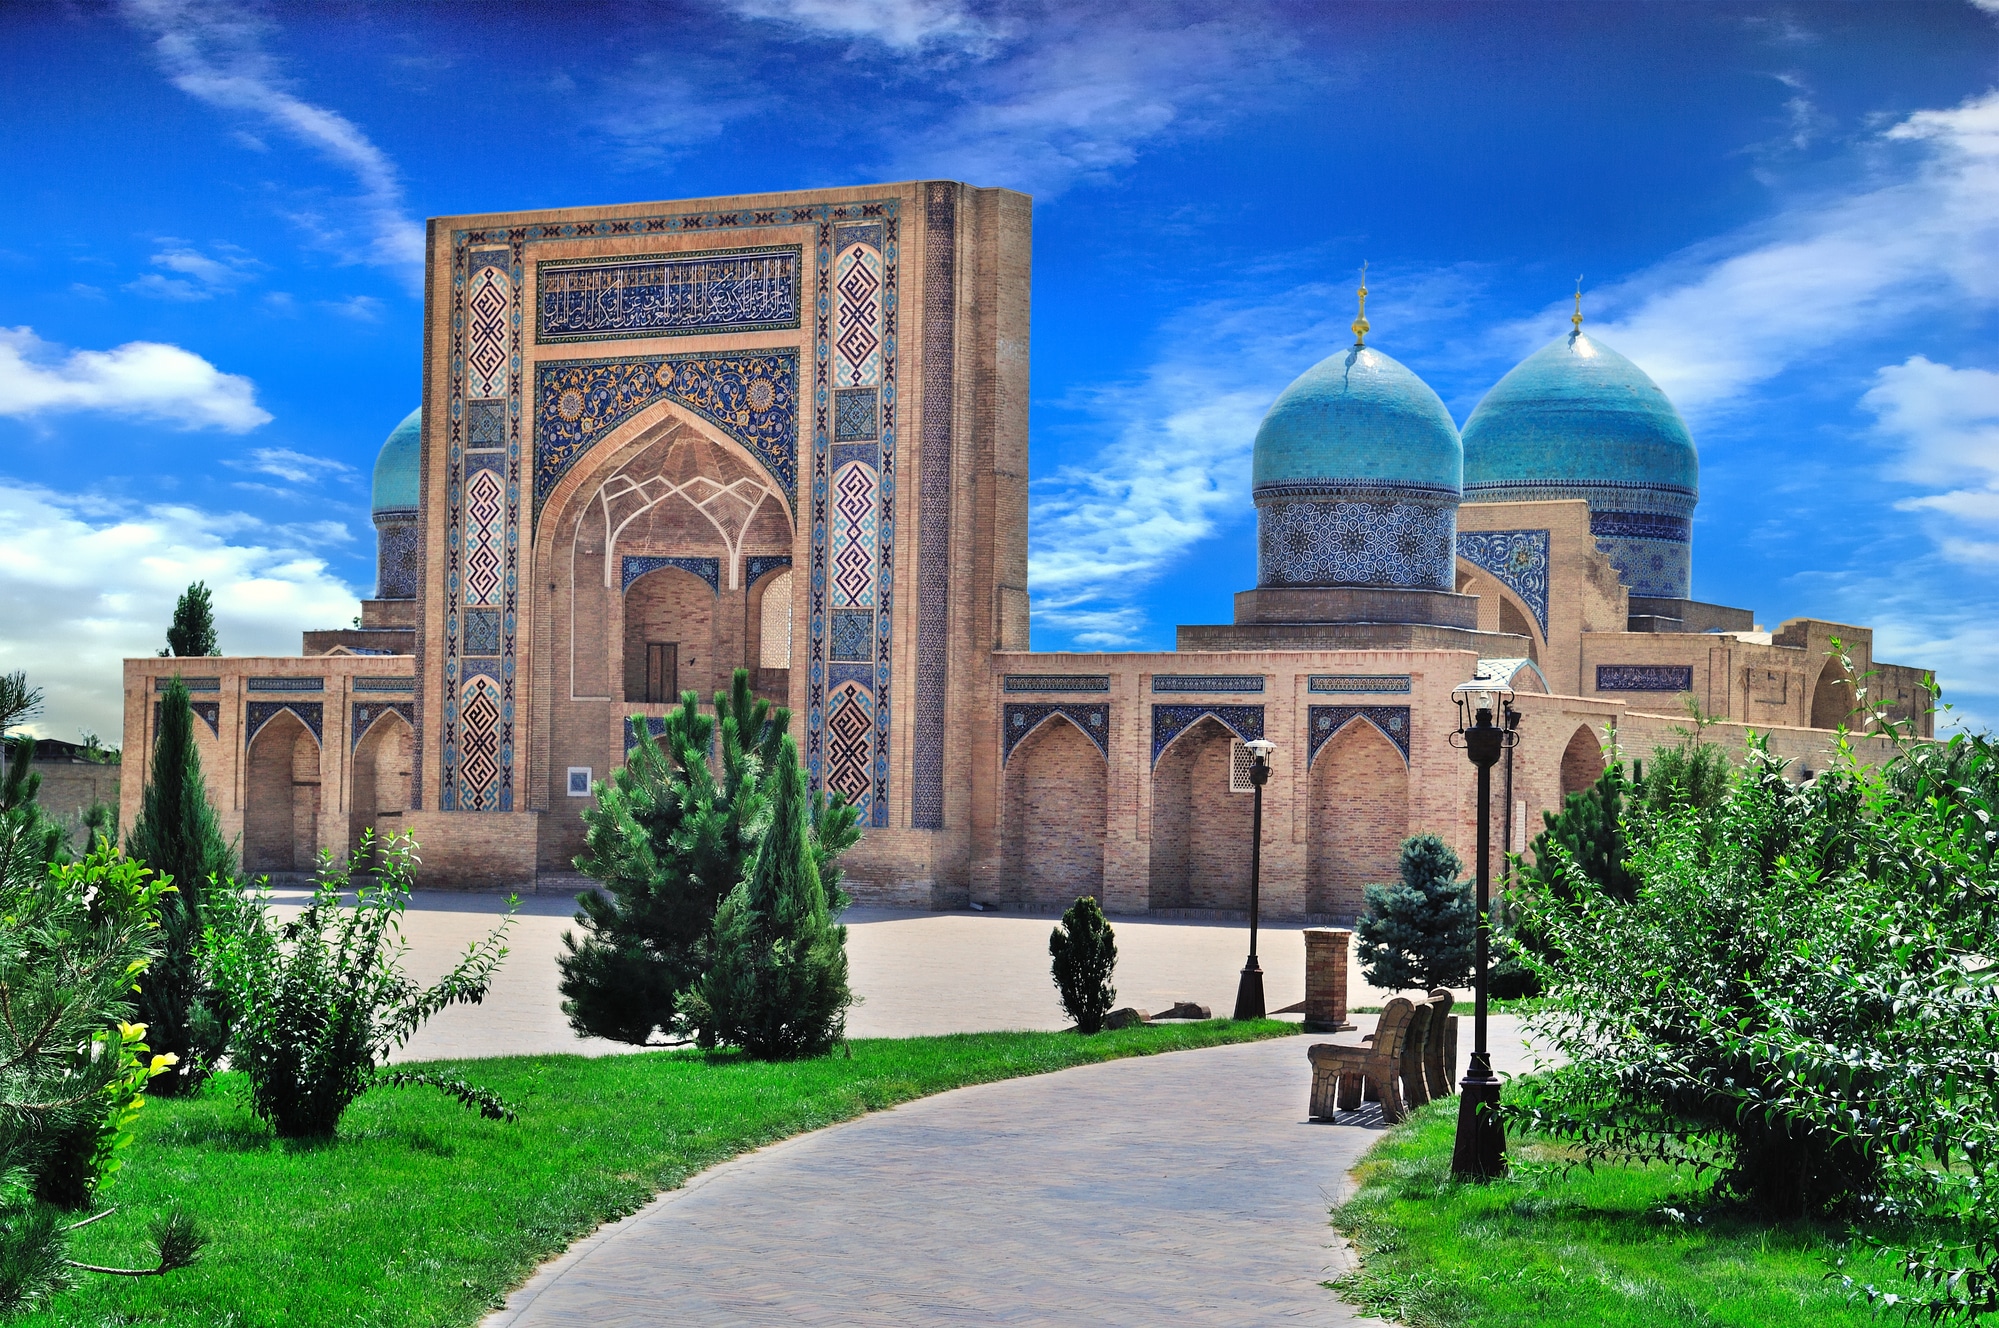 5 Reasons to Buy and Use Proxies in Uzbekistan